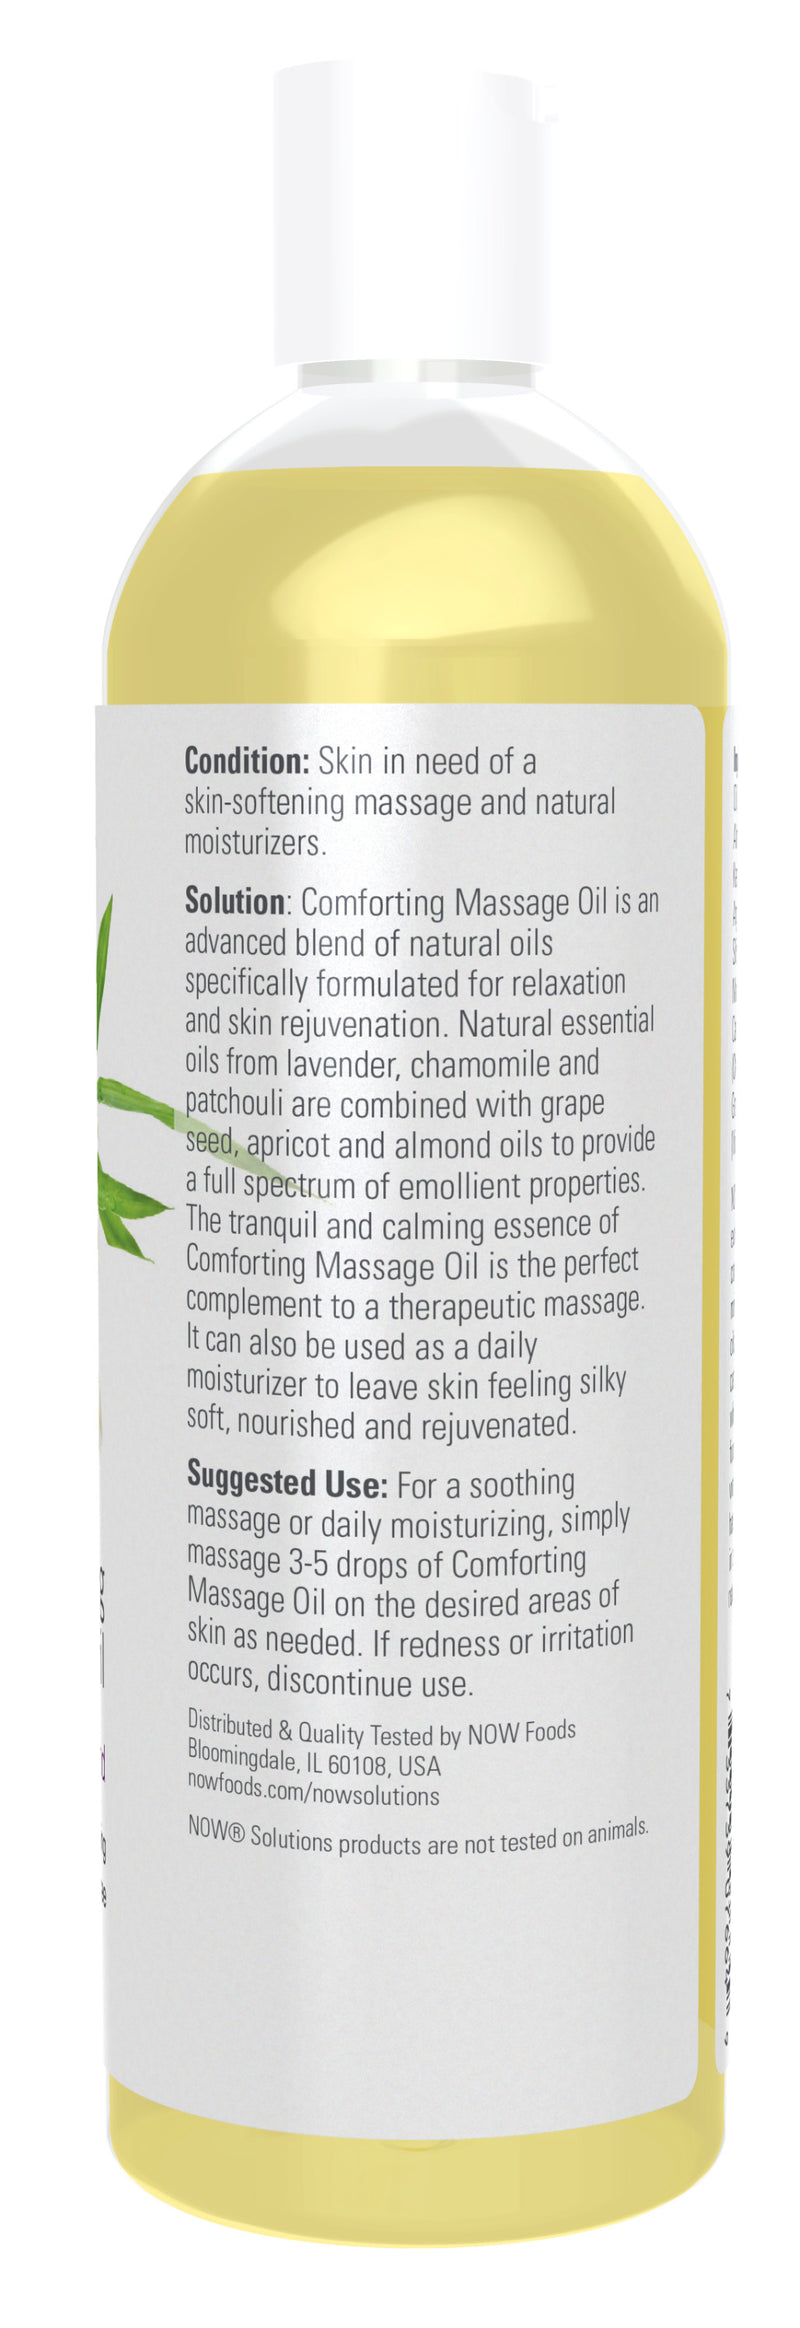 Now Solutions - Comforting Massage Oil 16 fl oz (473 ml)